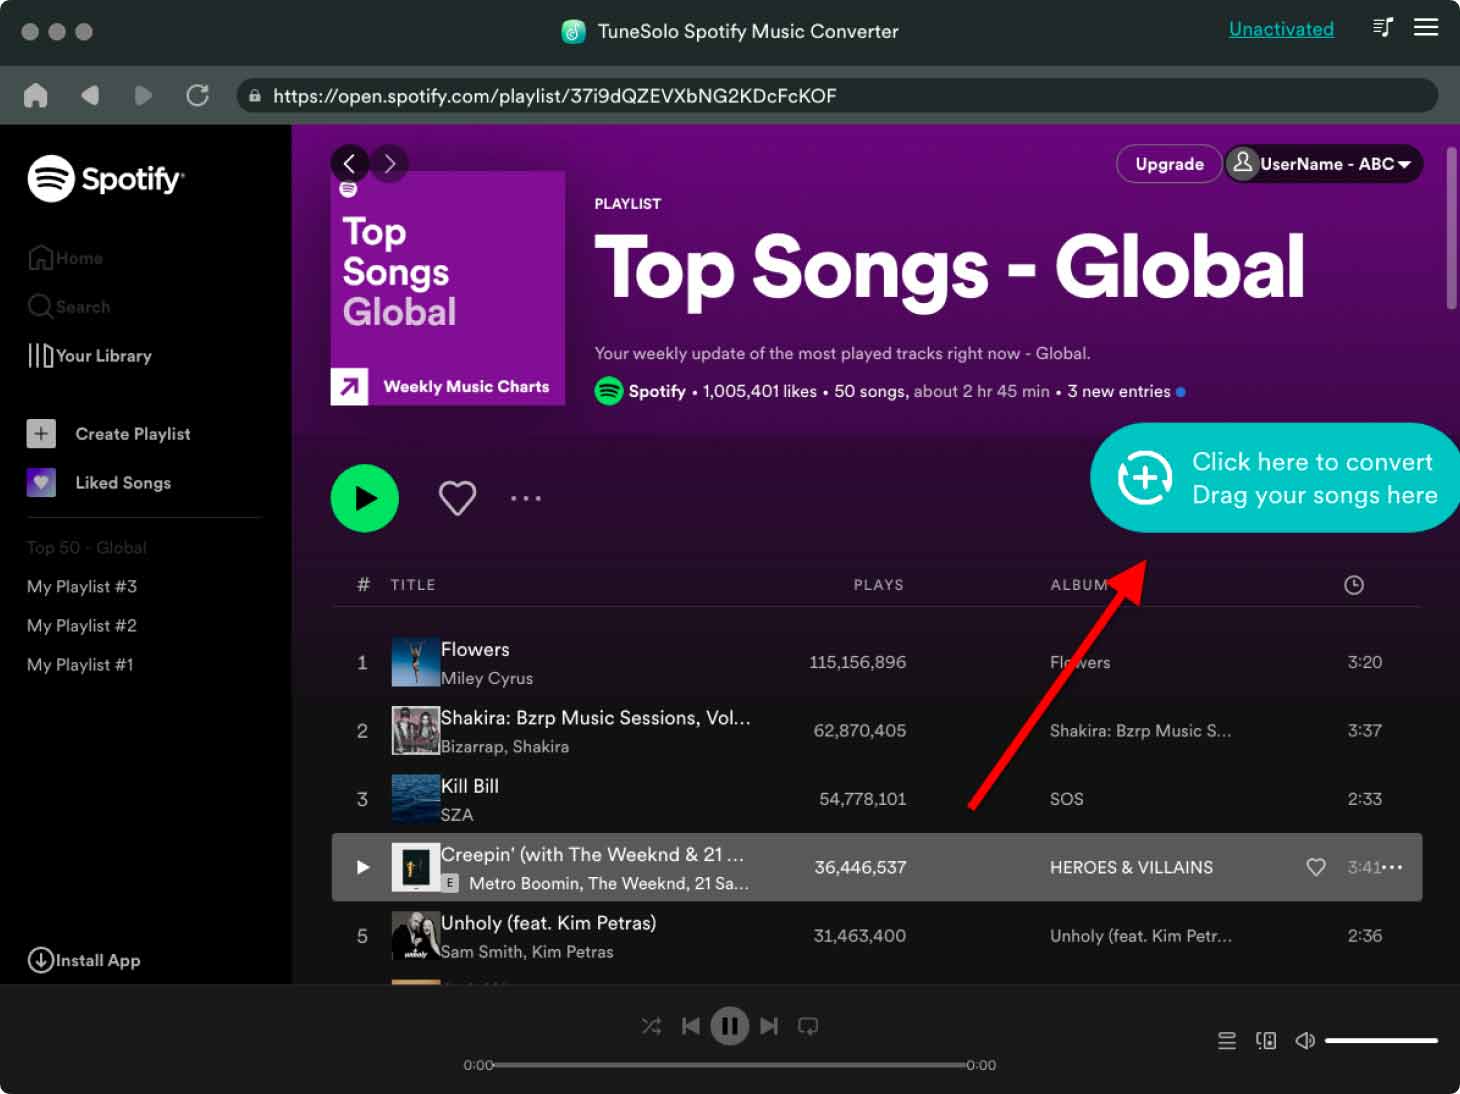 Download and Keep Your Spotify Songs